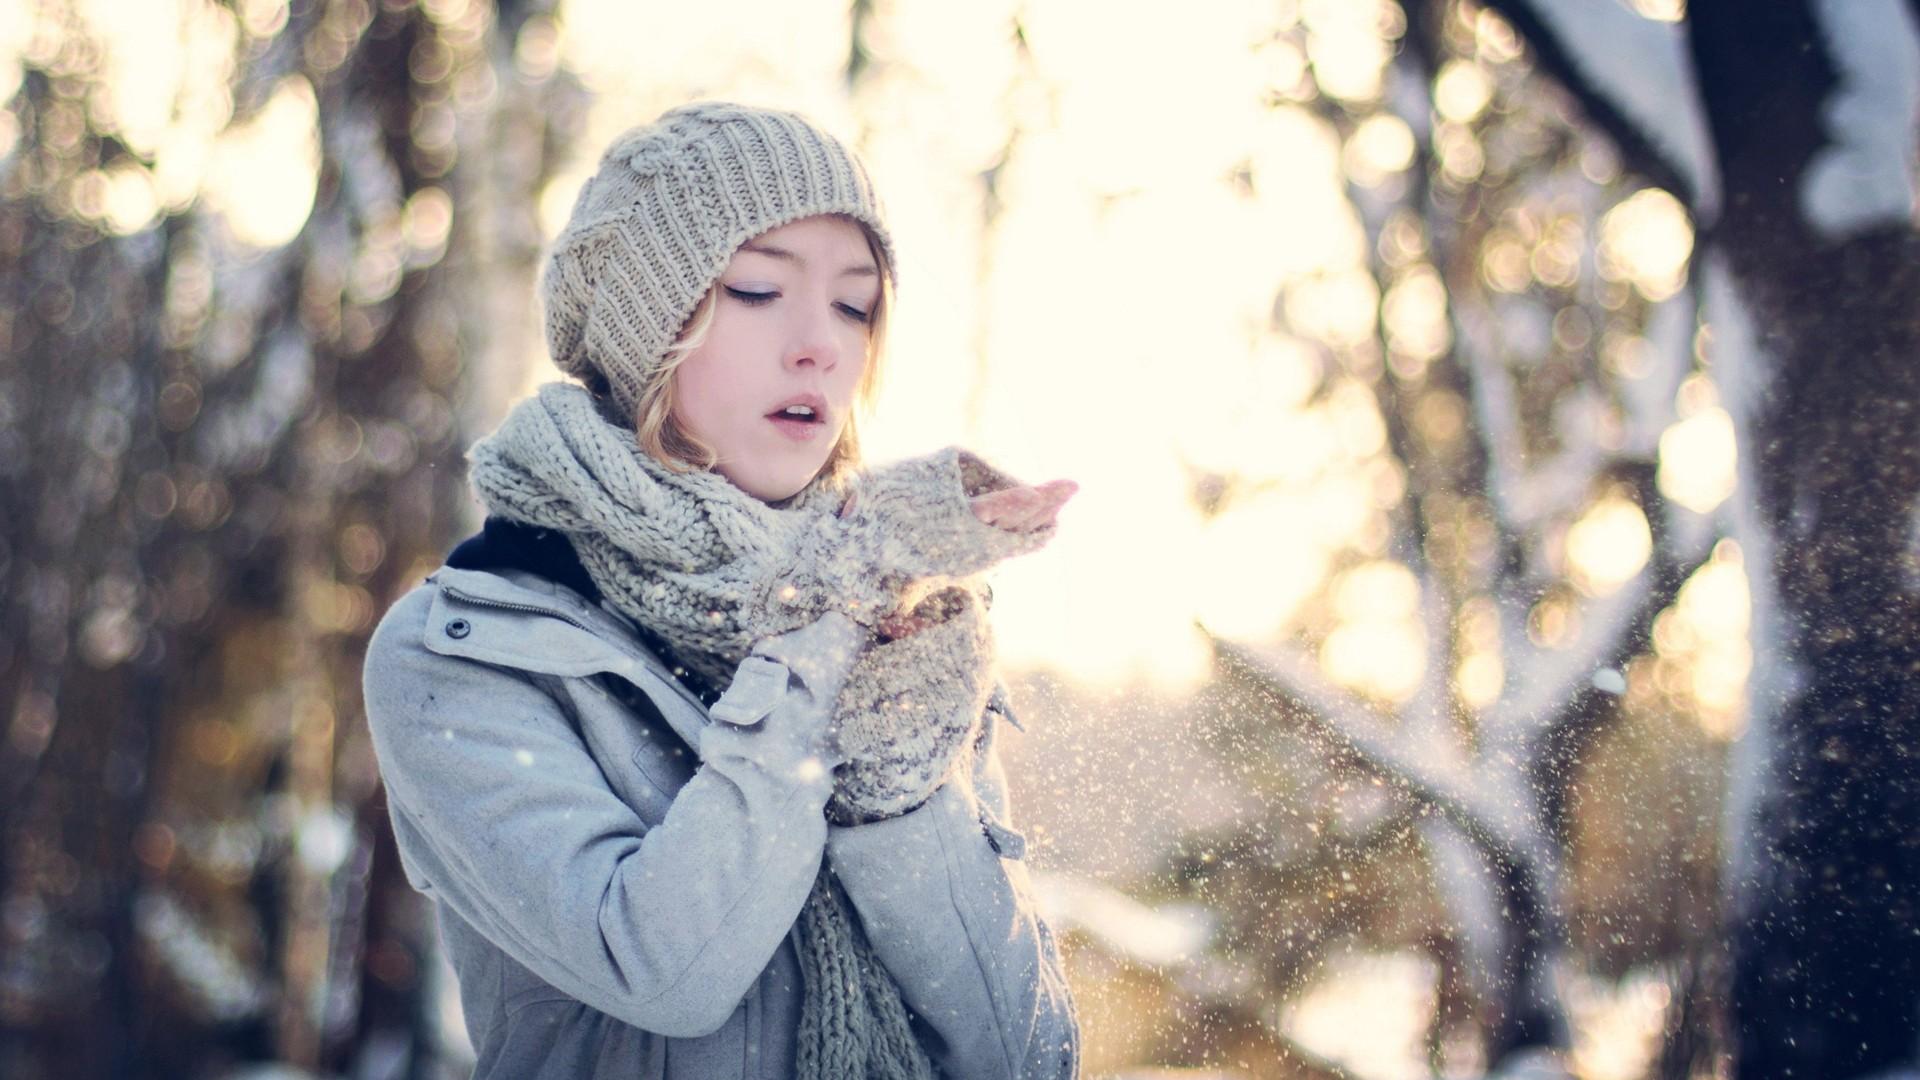 Winter Girl Wallpaper Image Photo Picture Background